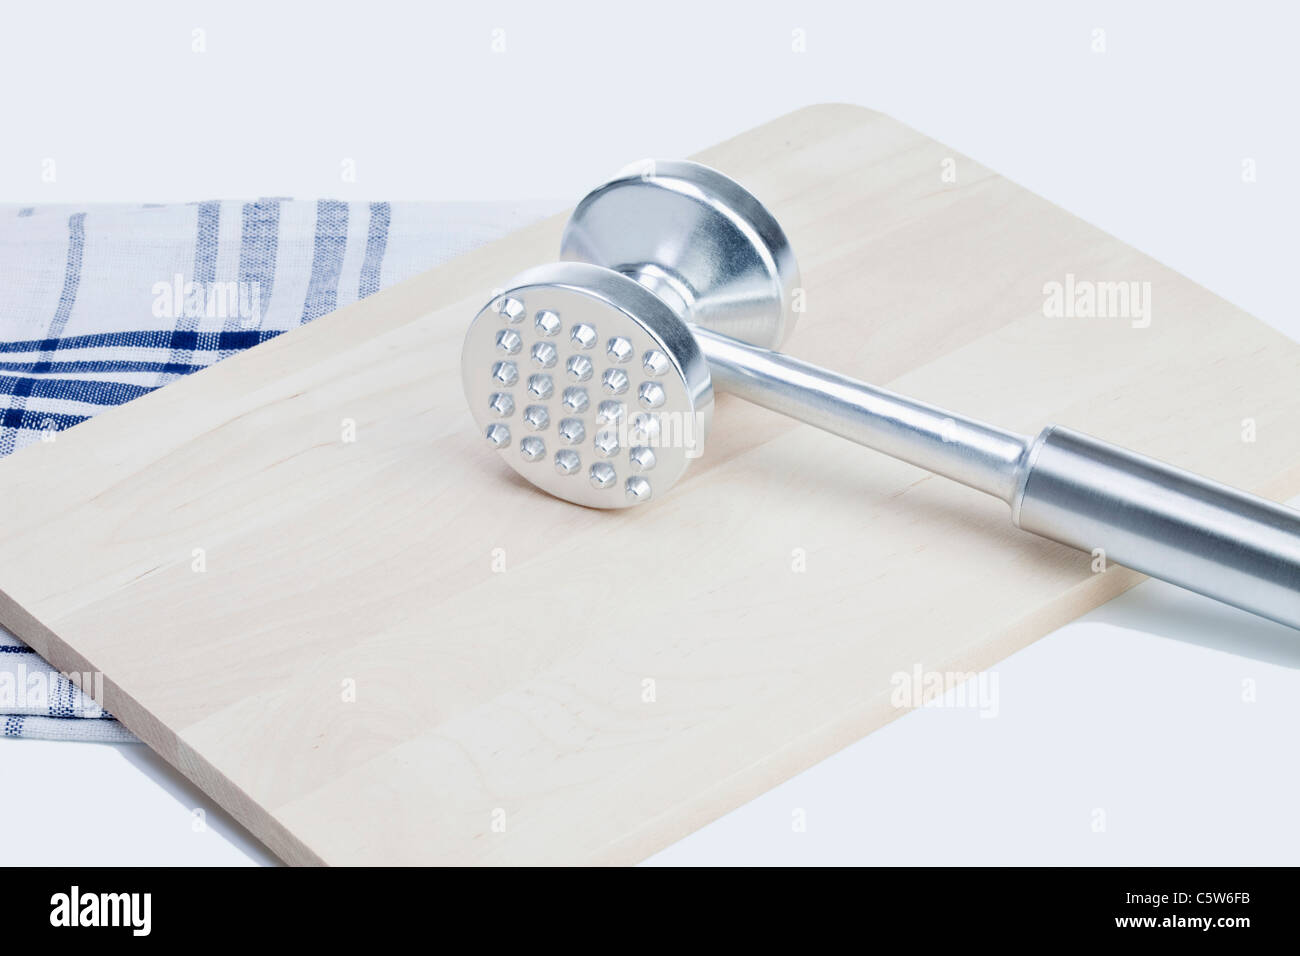 Meat tenderizer, chopping board and dish towel, close-up Stock Photo